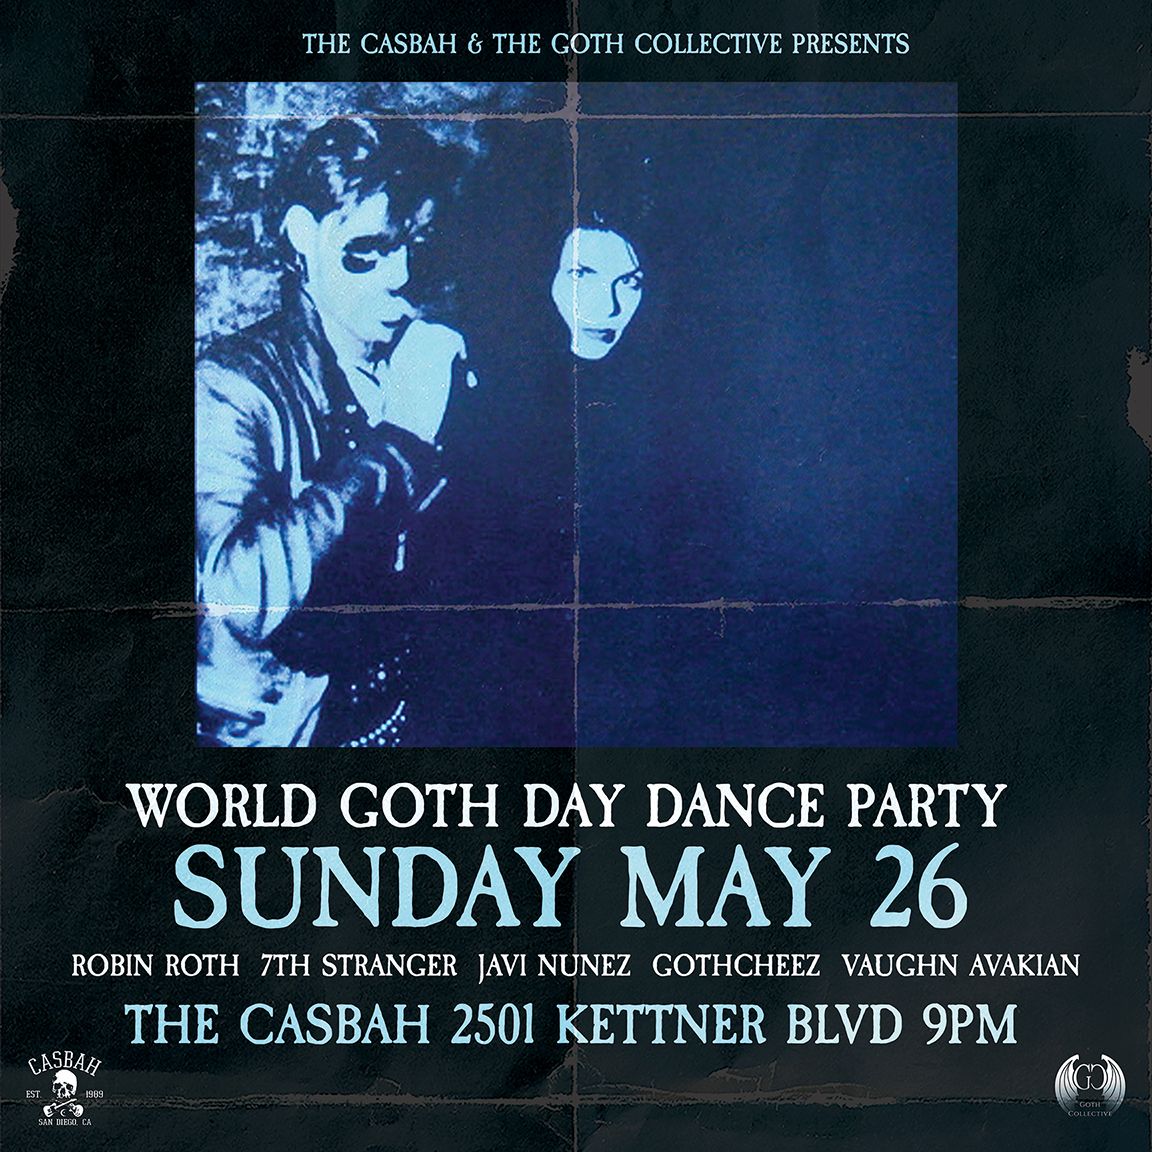 World Goth Day Dance Party